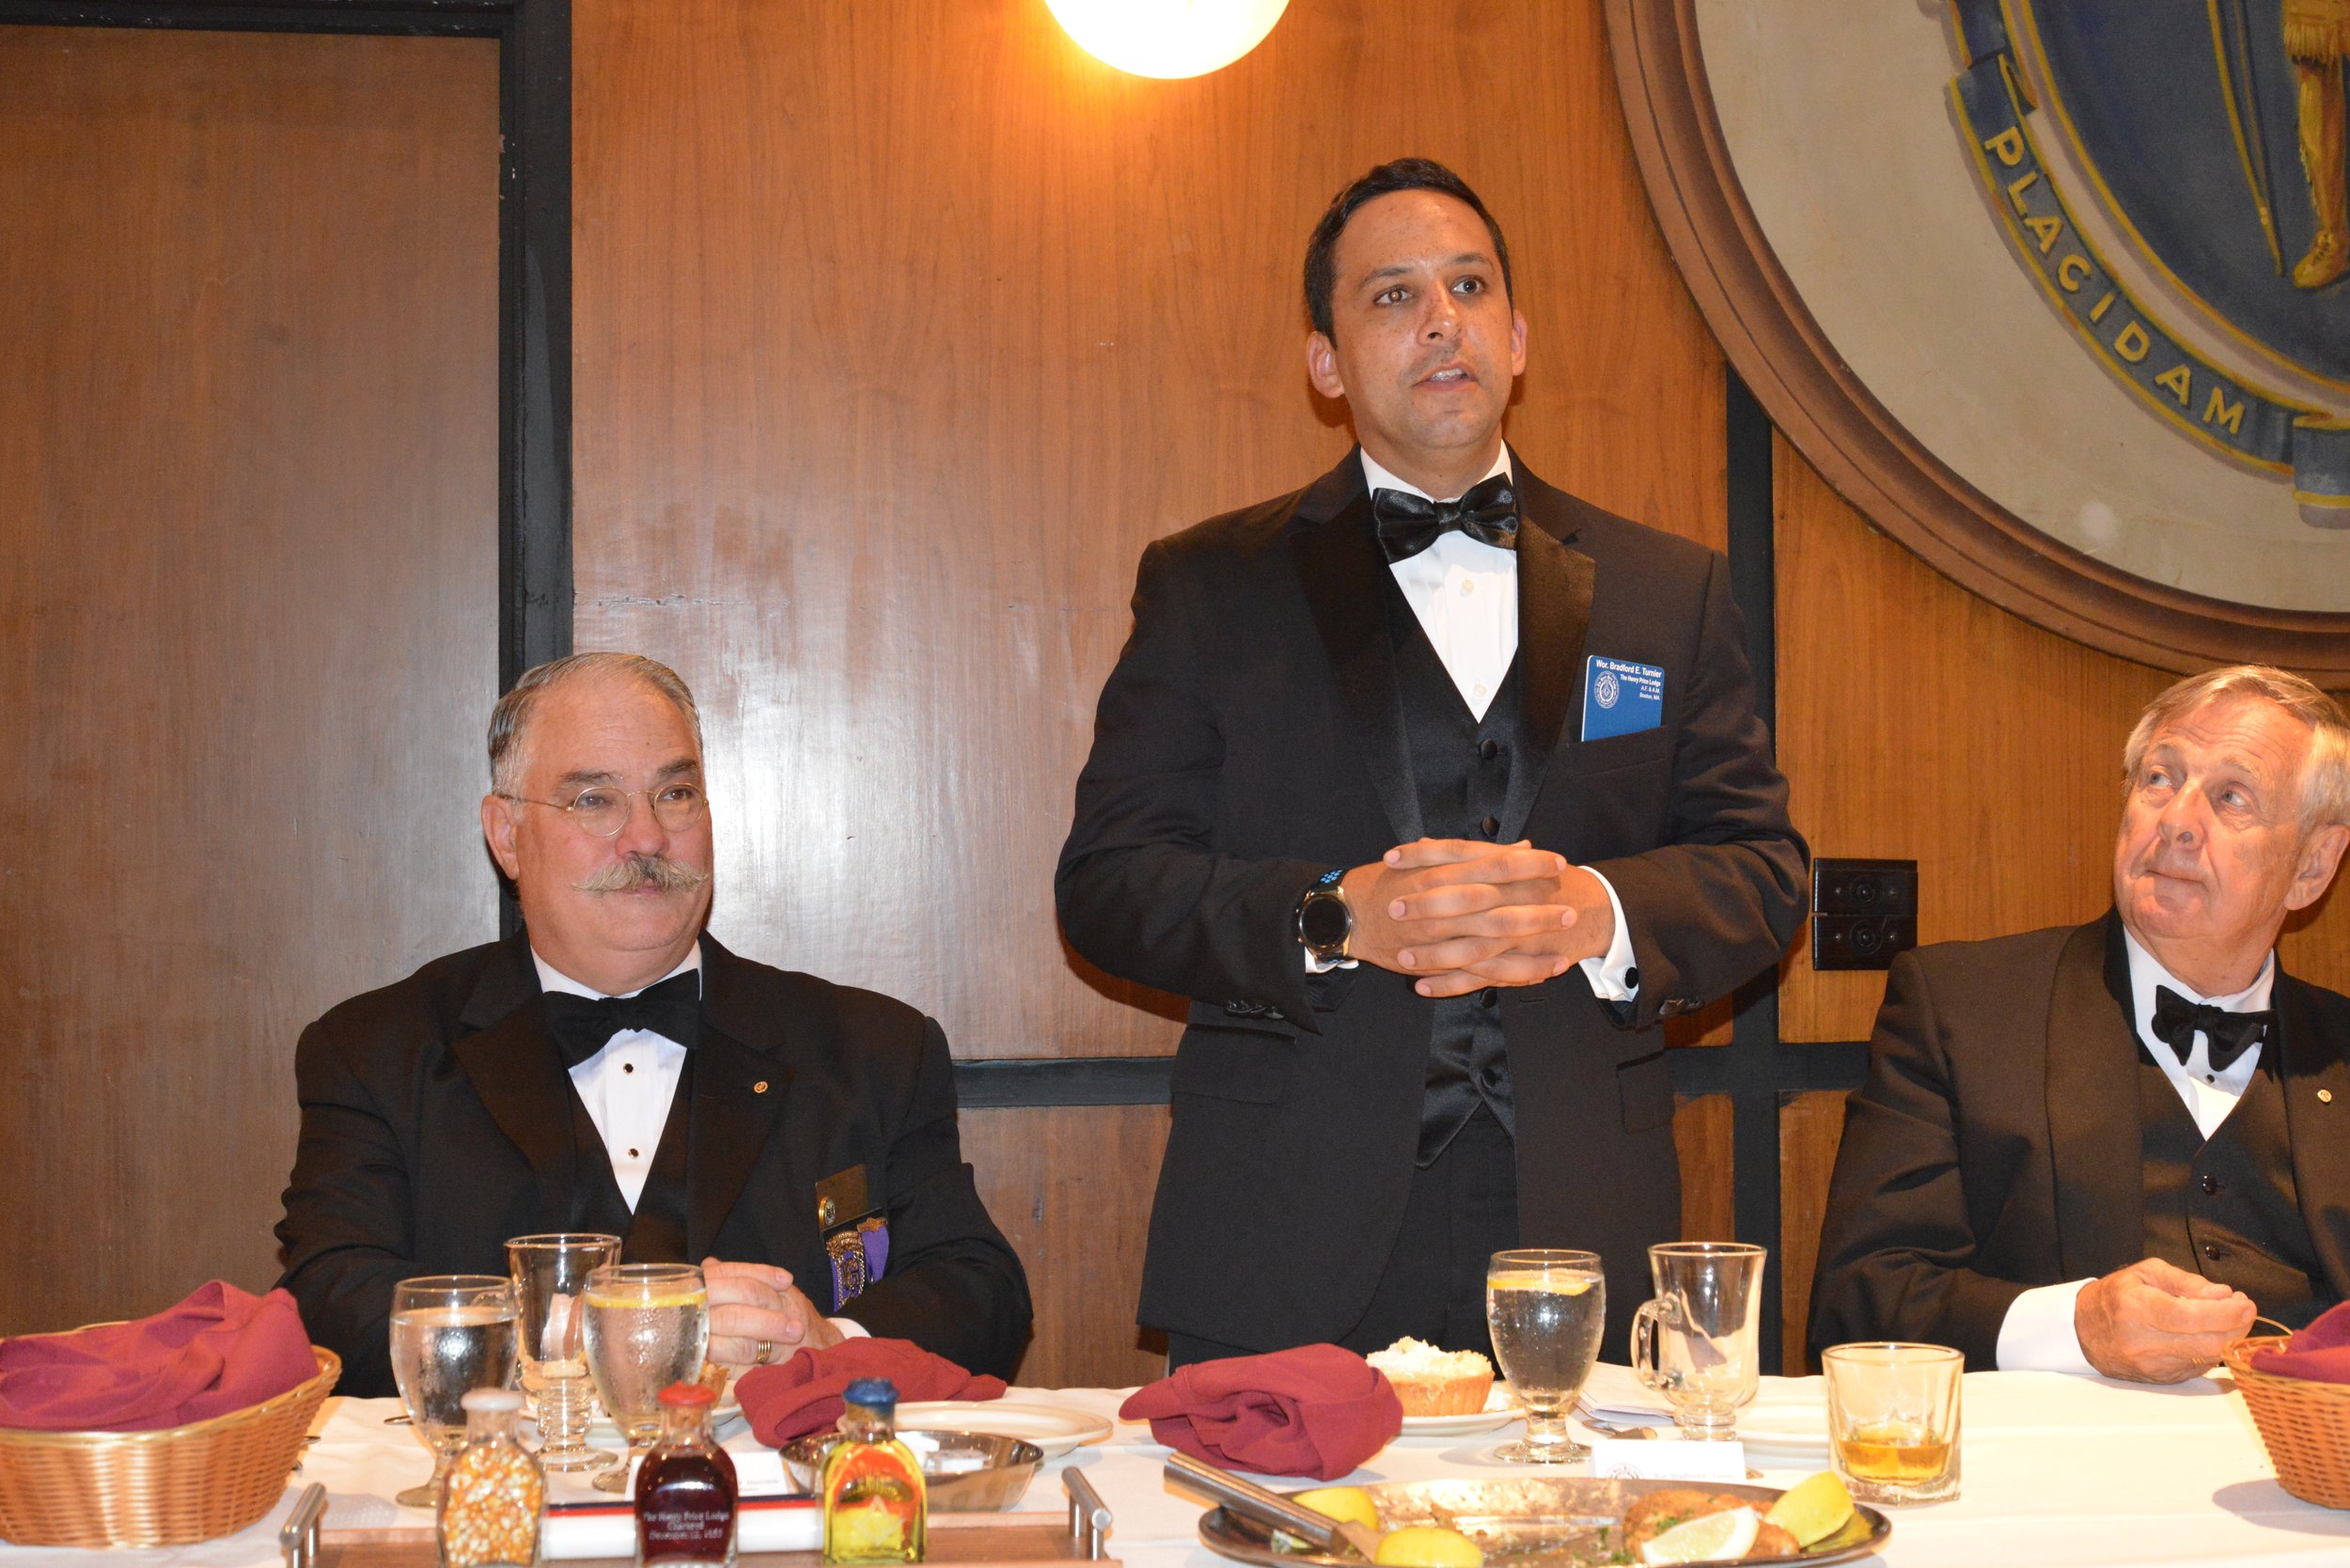  Remarks by Wor. Brad Turnier during dinner 